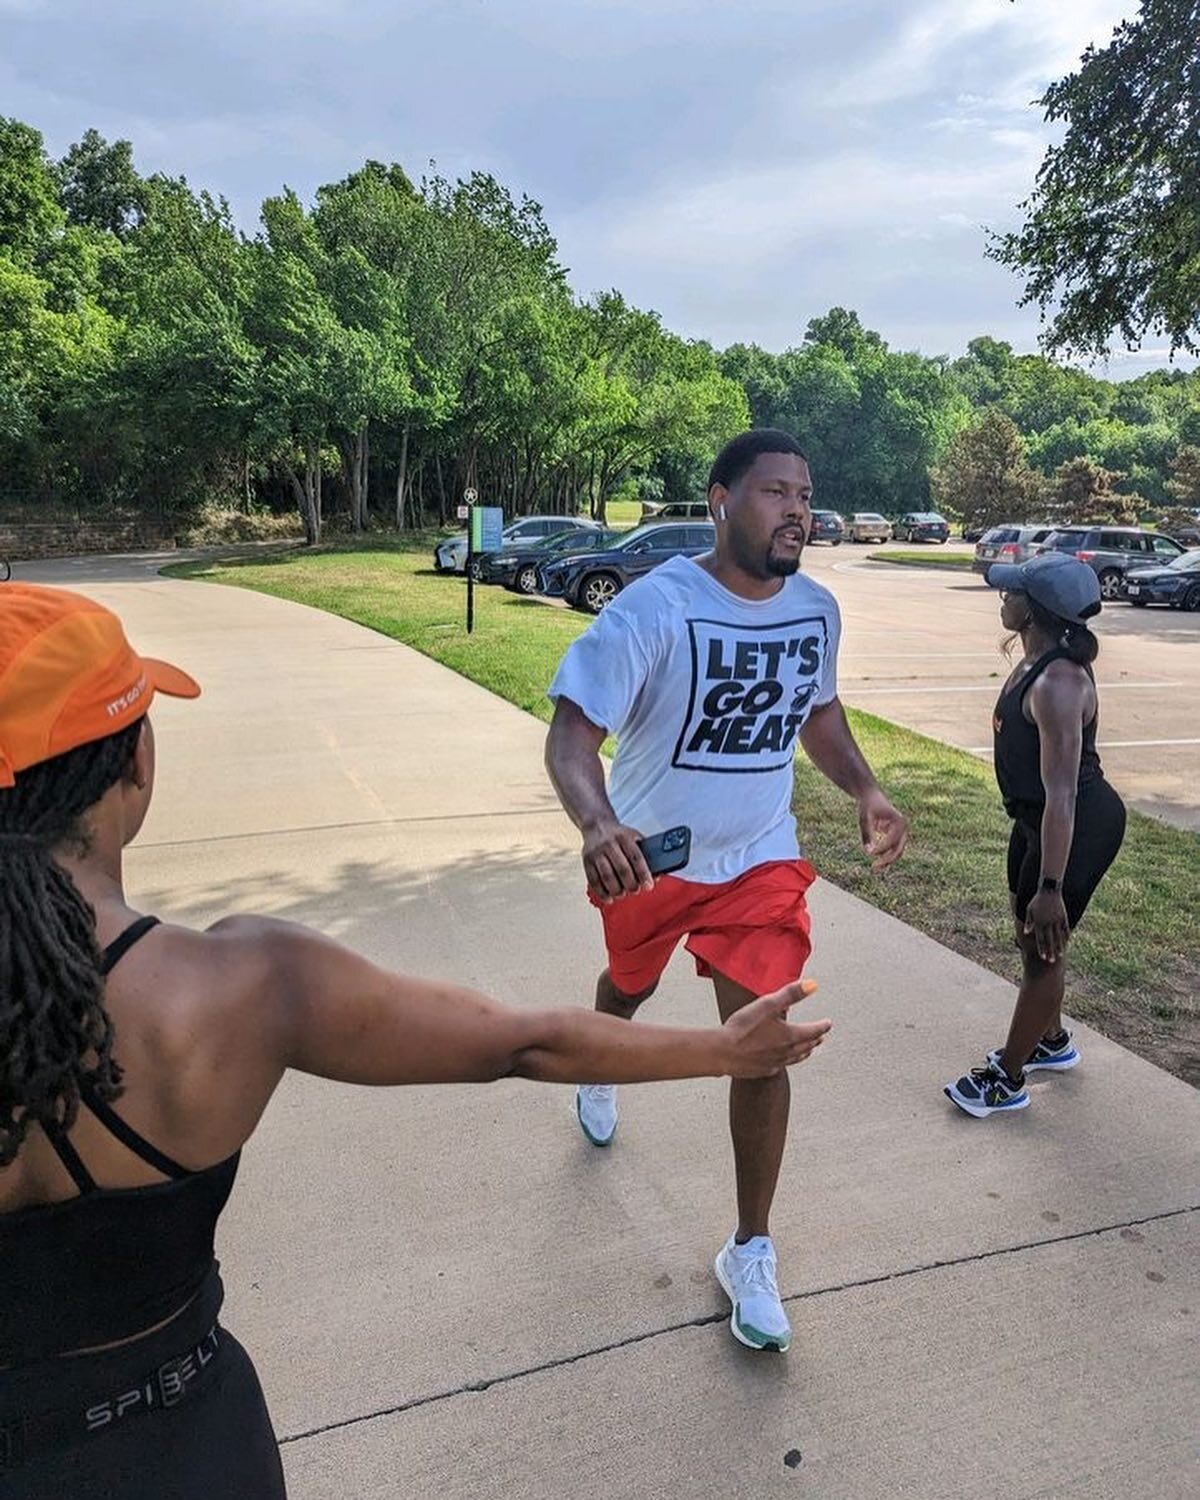 Come catch the vibes tomorrow morning! 

📍Andy Brown Park Central 

🏡 364 N. Denton Tap RD, Coppell, TX 75019 

🕕 8:30am

#weboutdemmiles #goodmorning #zquad #saturday #tomorrow #joinus #irvingtx #dallastexas #zftrunclub #fyp #exploremore #explore